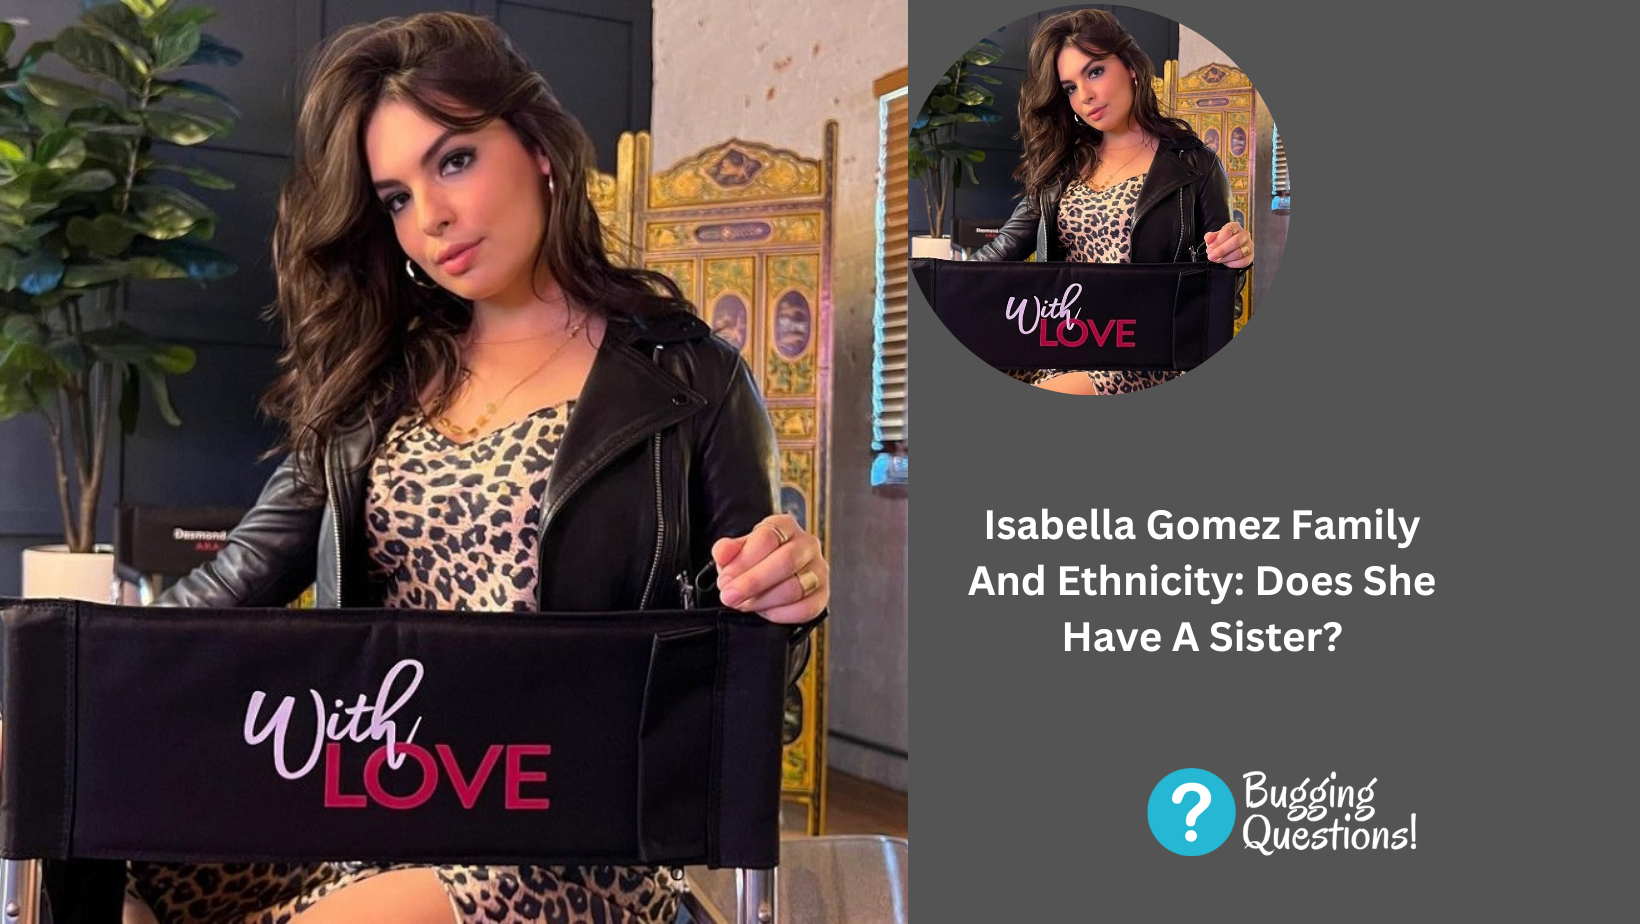 Isabella Gomez Family And Ethnicity: Does She Have A Sister?